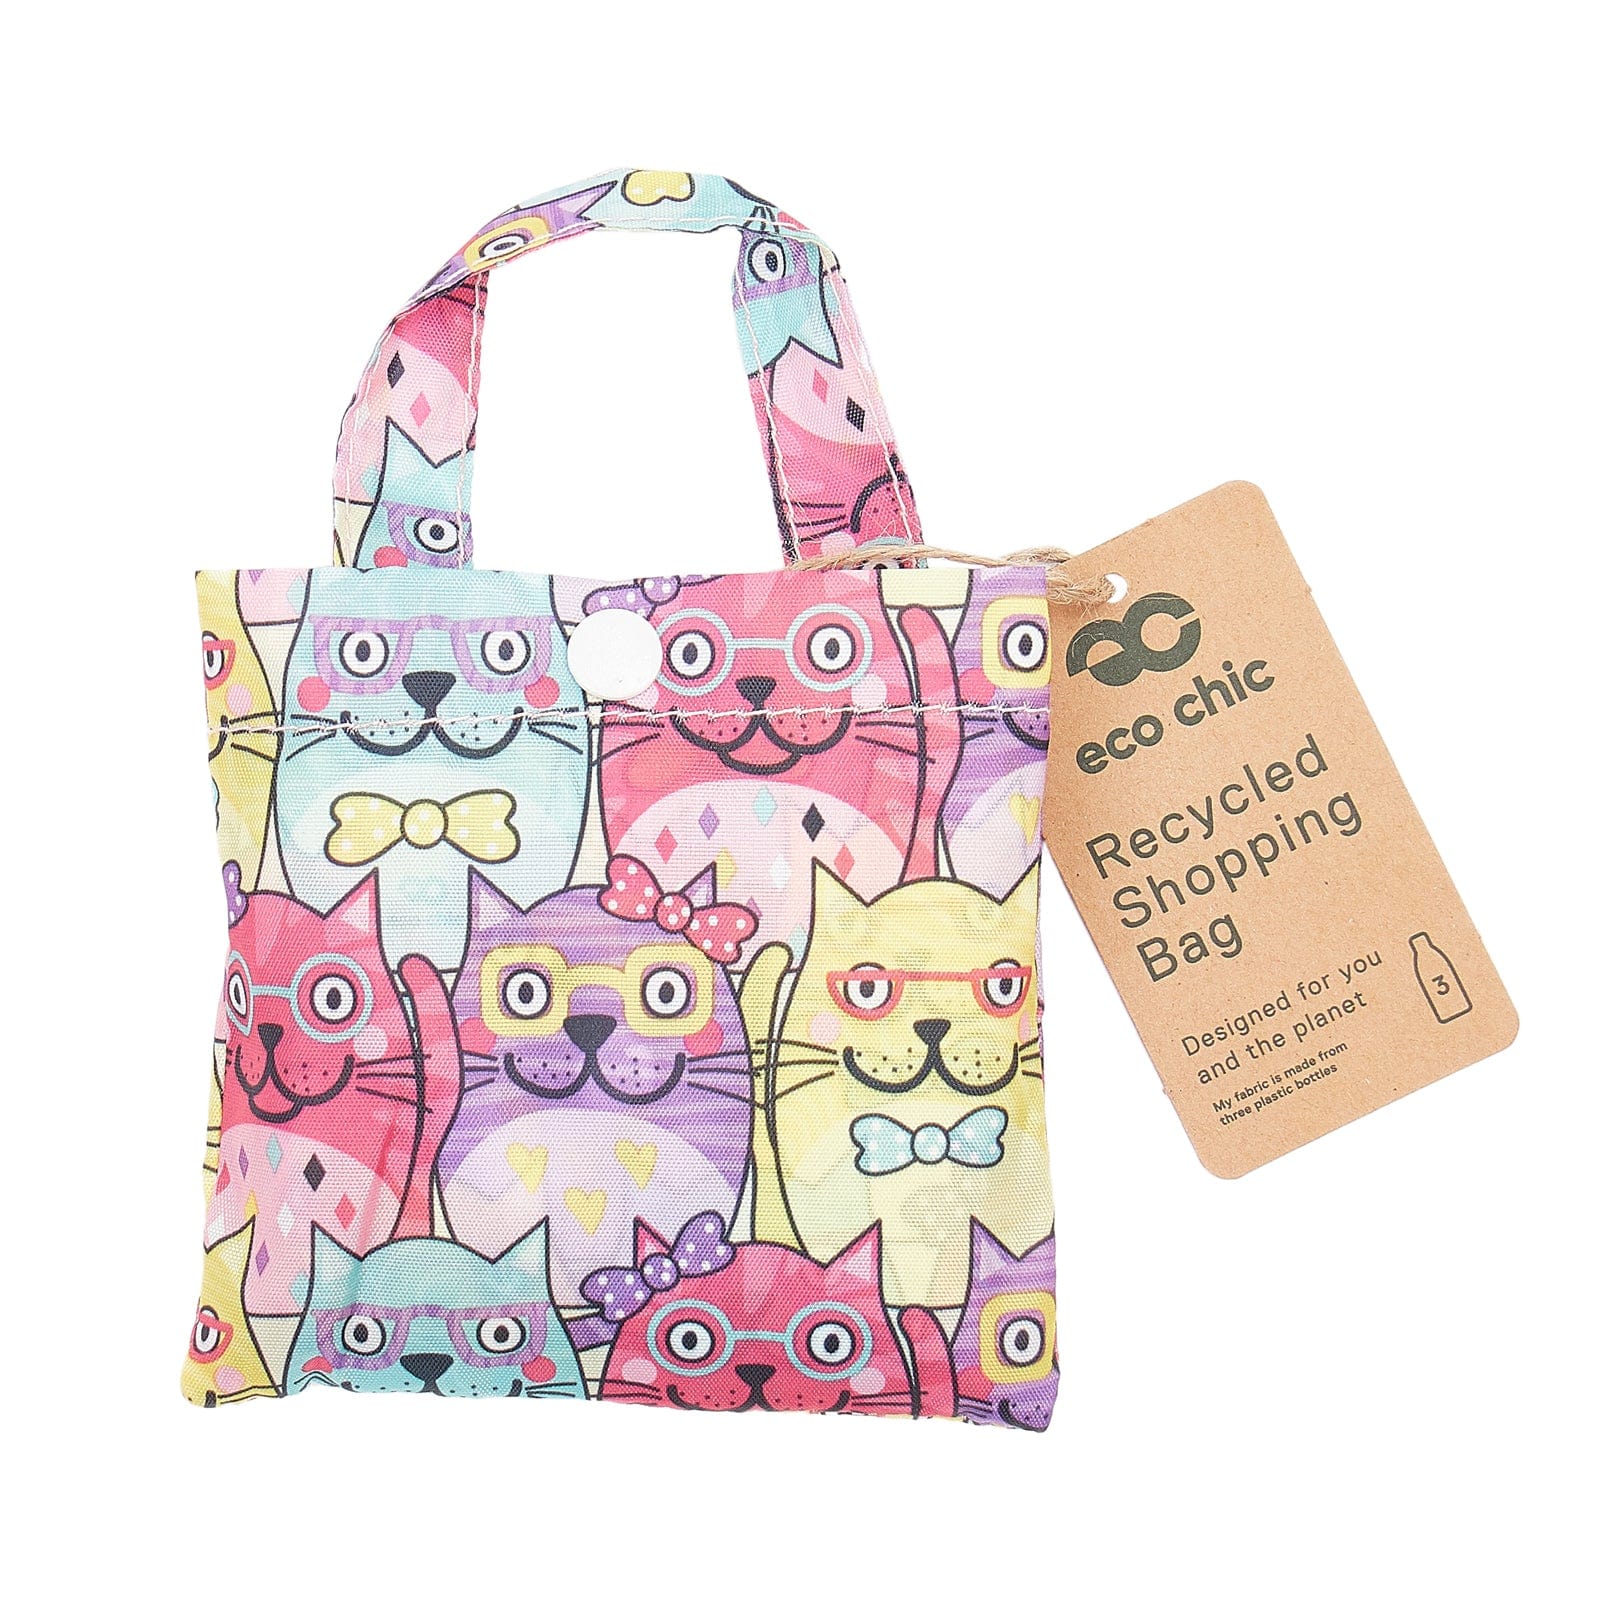 Eco Chic Multiple Eco Chic Lightweight Foldable Reusable Shopping Bag Glasses Cats